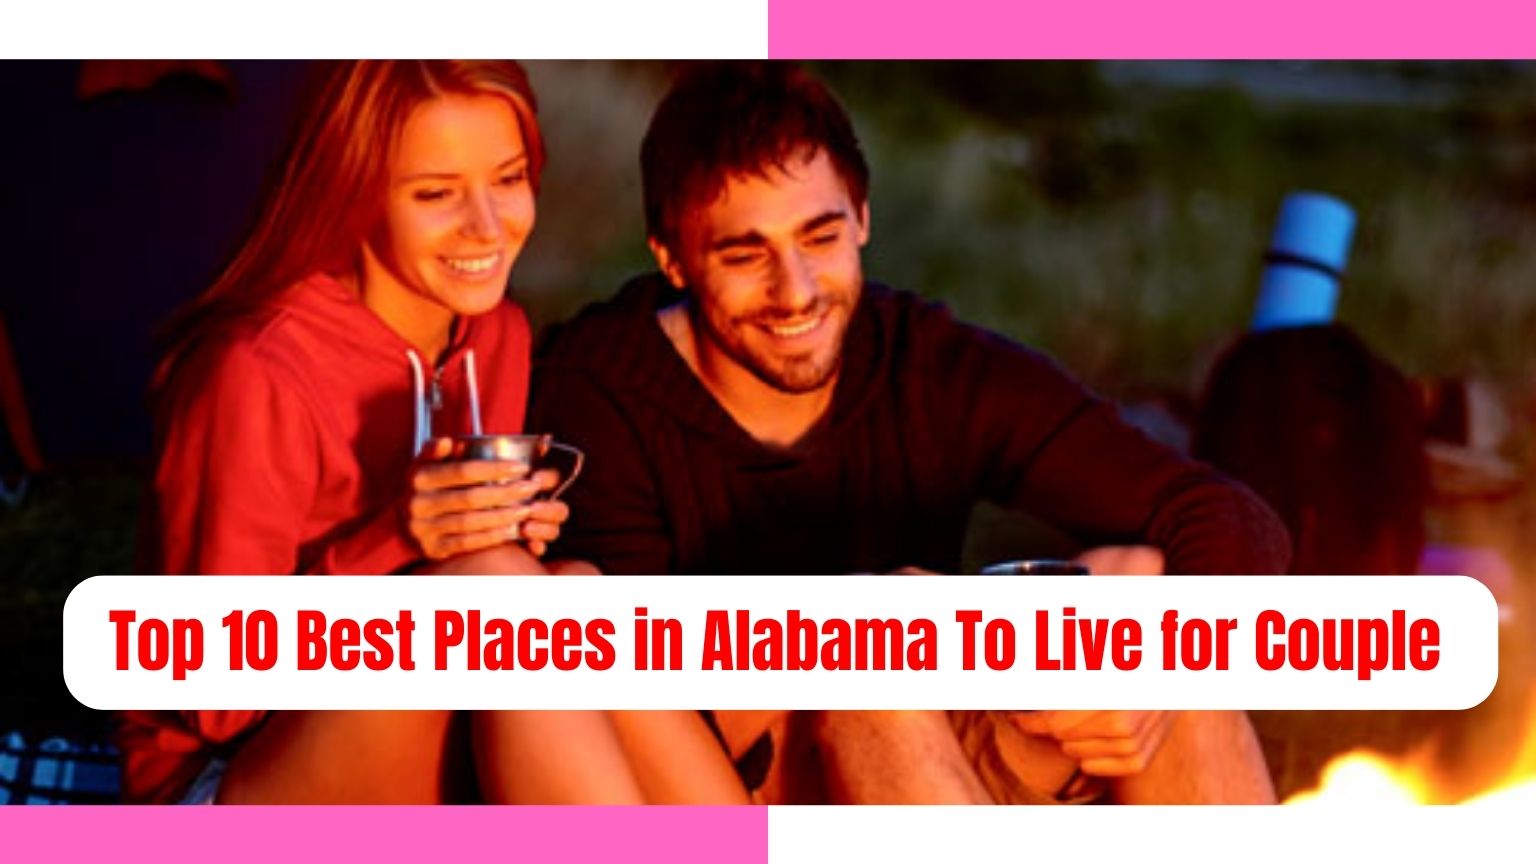 best places in alabama to live, best places in alabama, best places in alabama to retire, Top 10 Best Places in Alabama To Live for Couple on Only Social Security Checks,